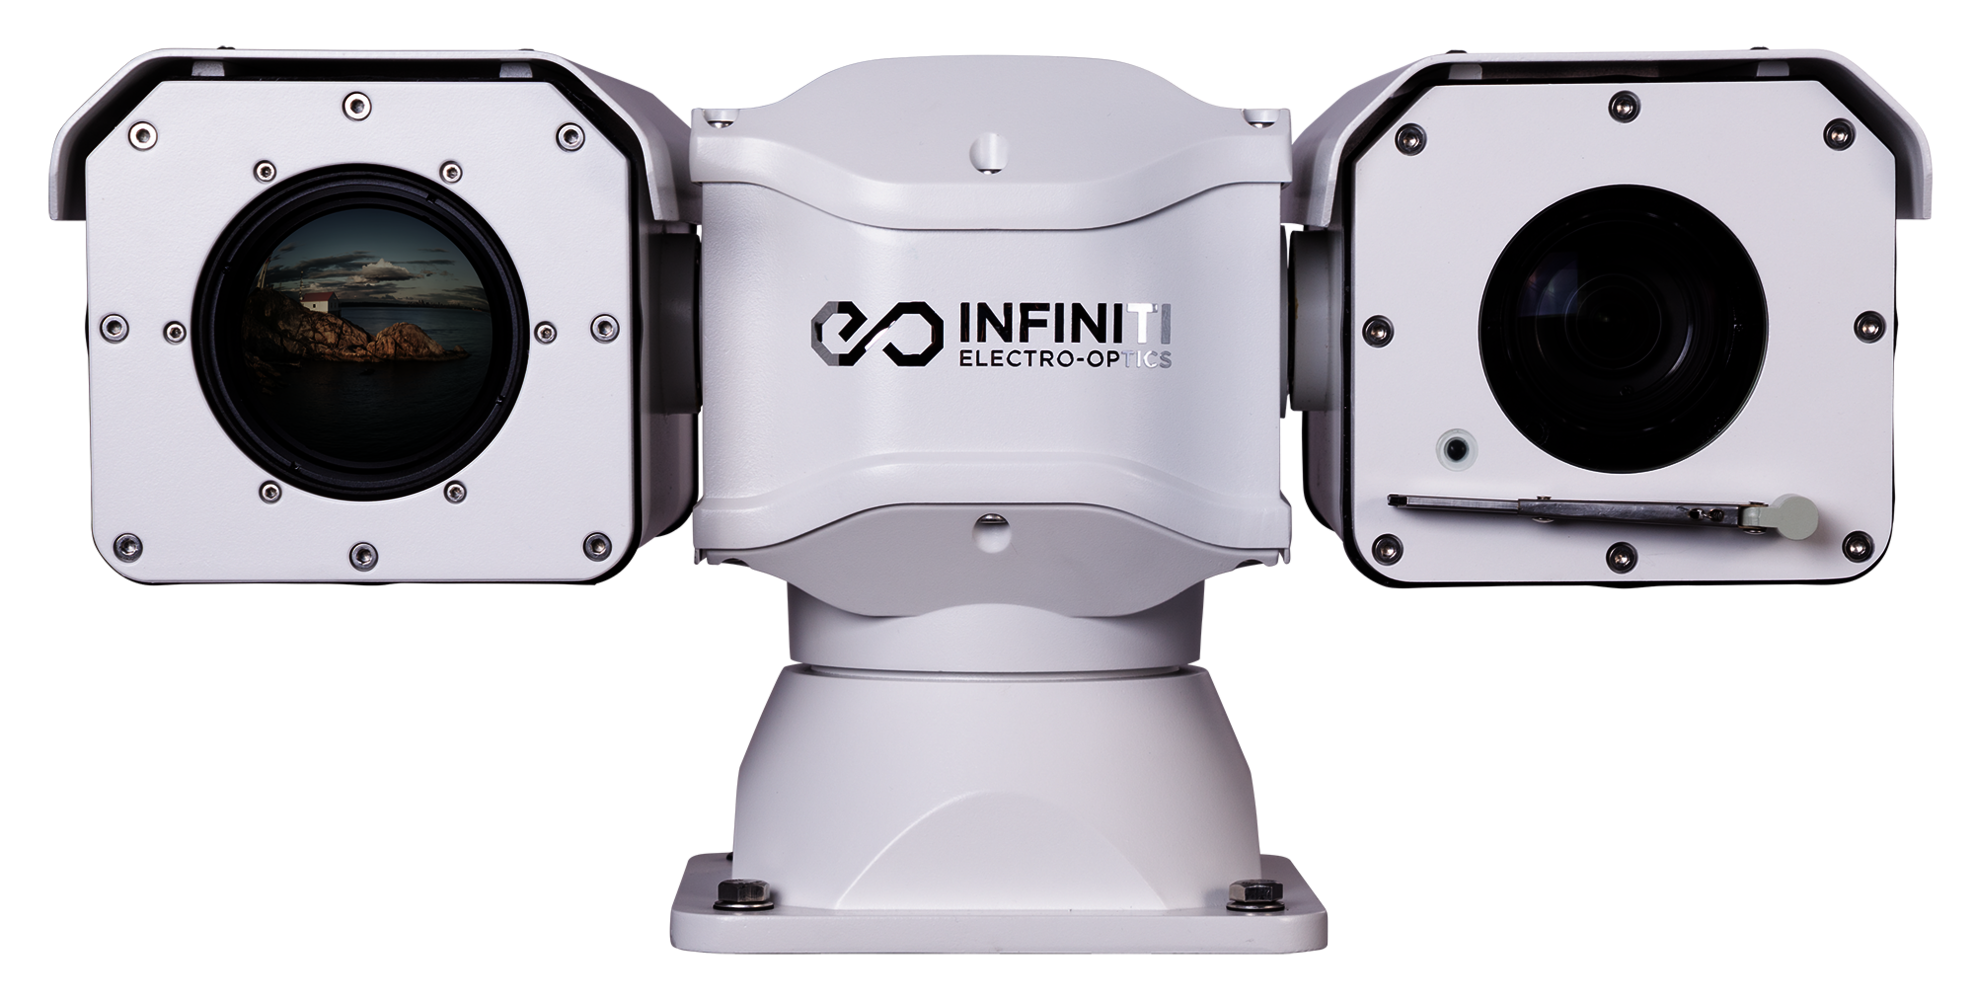 Eclipse Thermal Infrared PTZ Camera System by Infiniti Electro-Optics